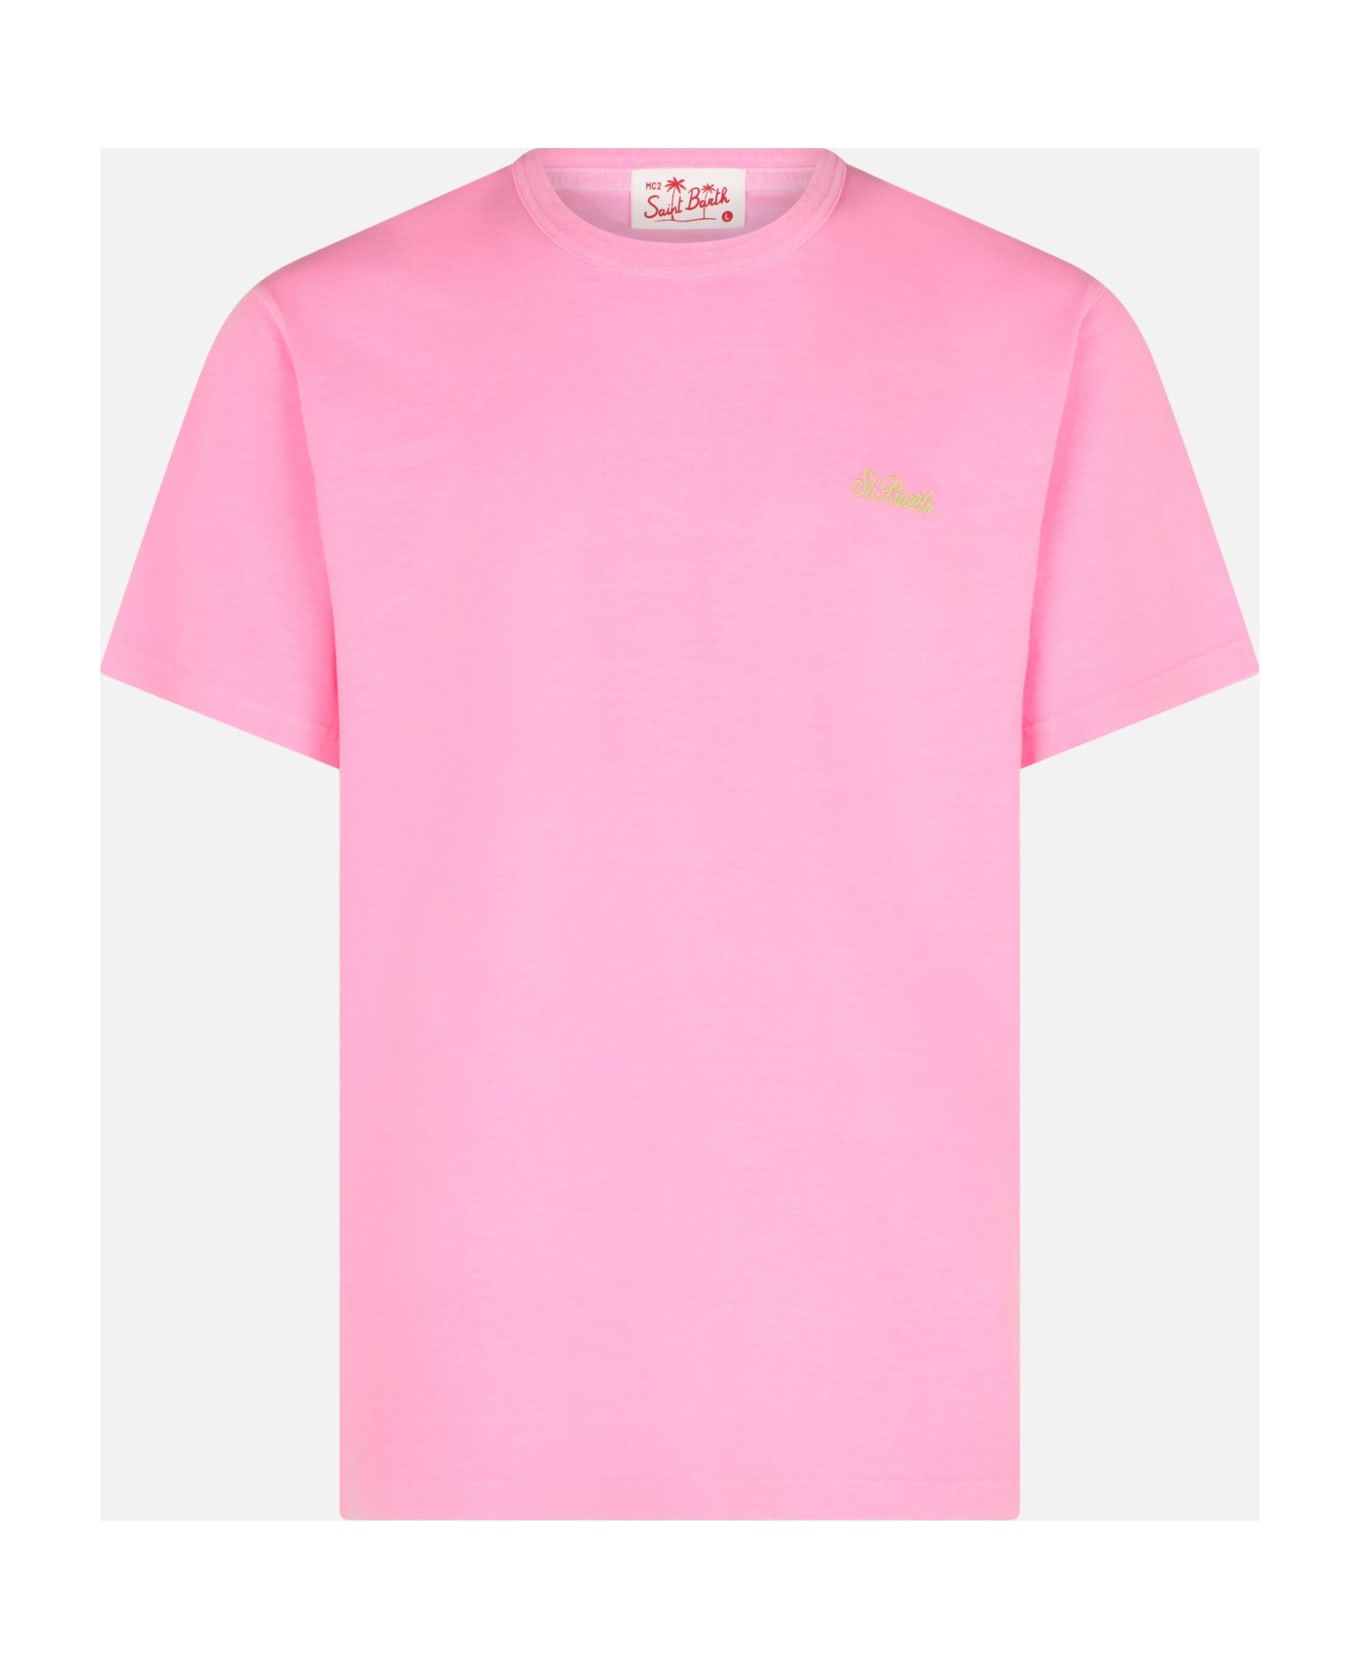 MC2 Saint Barth Man Pink Cotton T-shirt With St. Barth Embroidery - FLUO シャツ